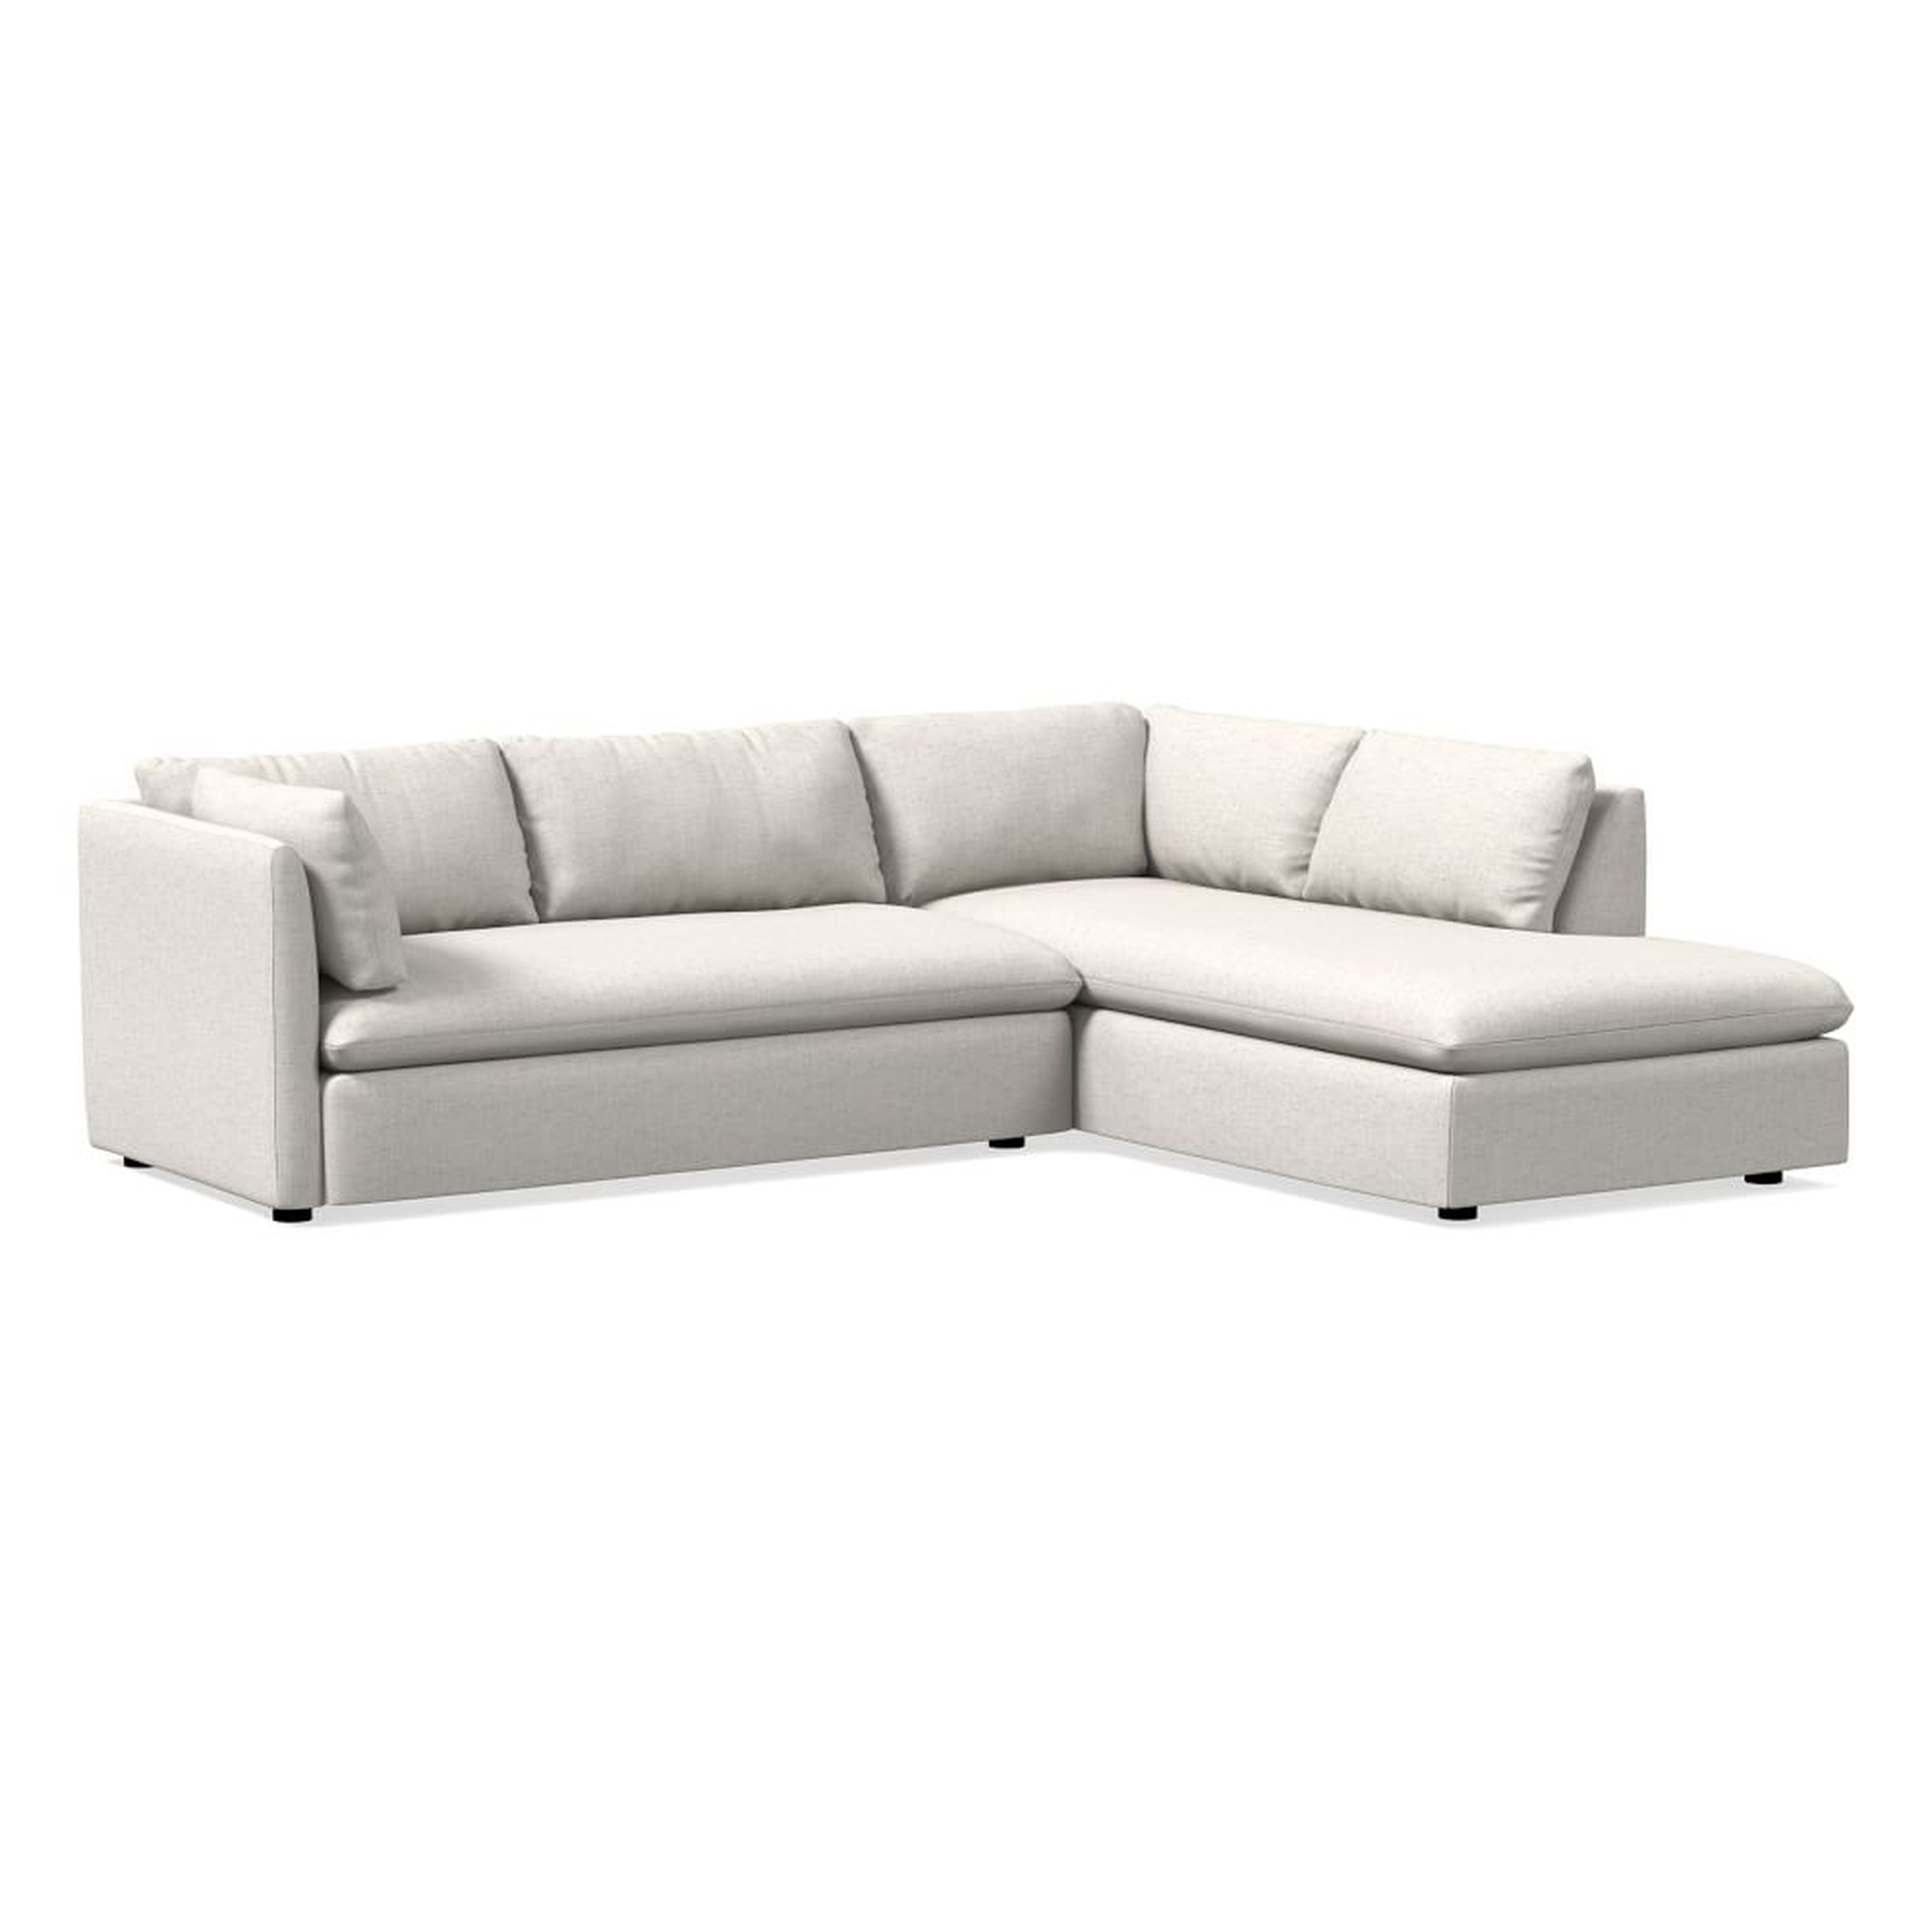 Shelter 2-Piece Terminal Chaise Sectional - Right - White Performance Coastal Linen - West Elm